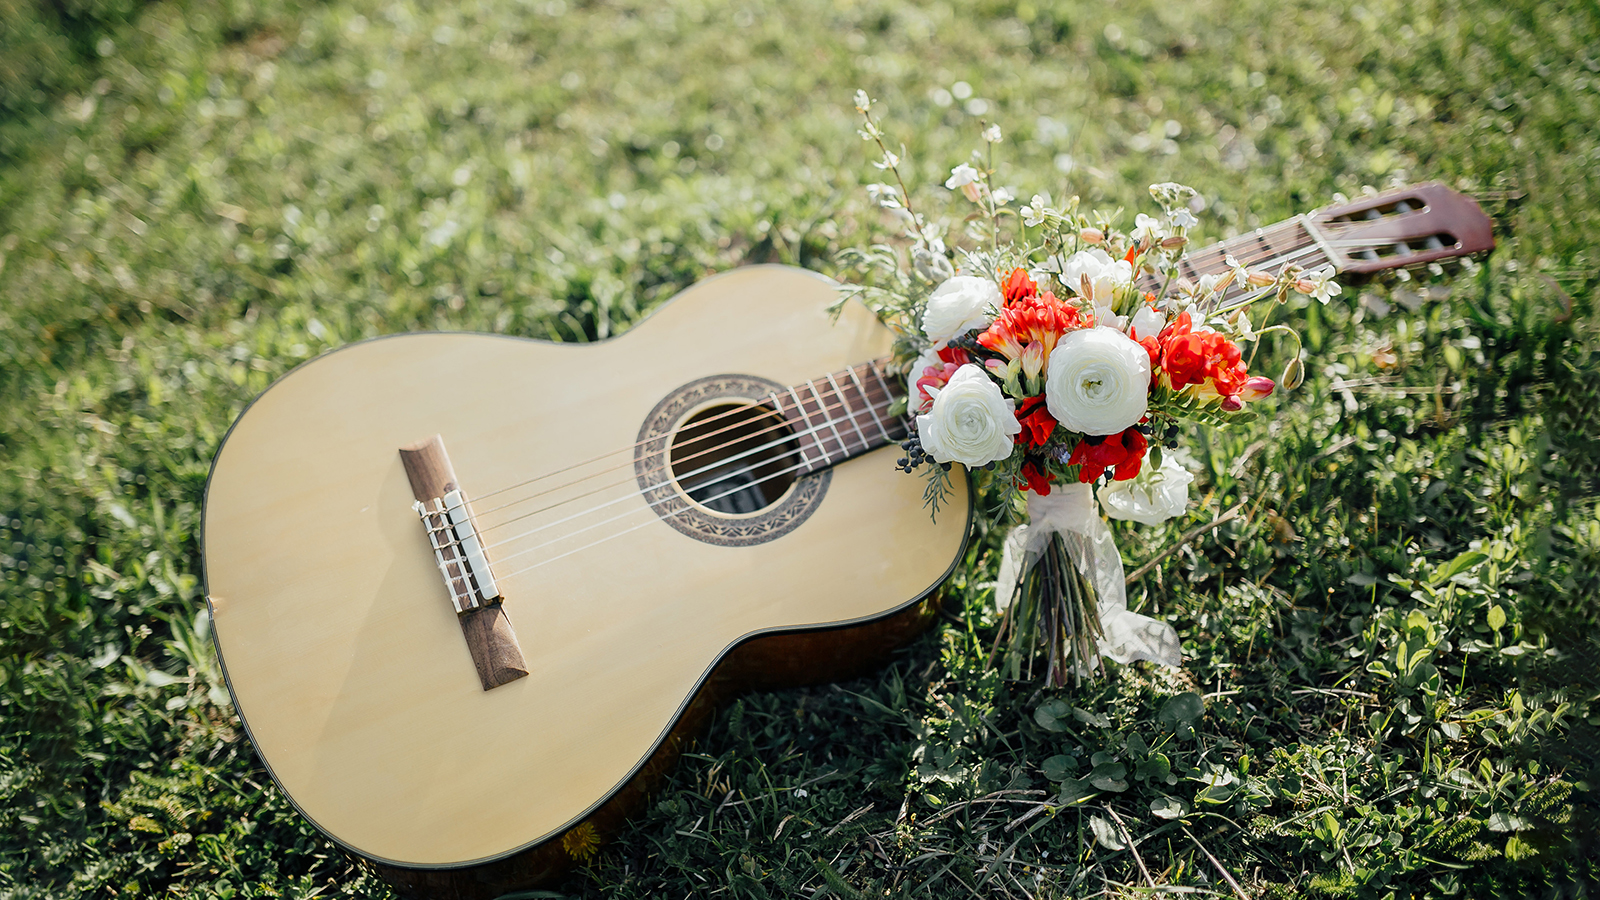 wedding bouquet of red and white flowers and greenery near a guitar on the green grass